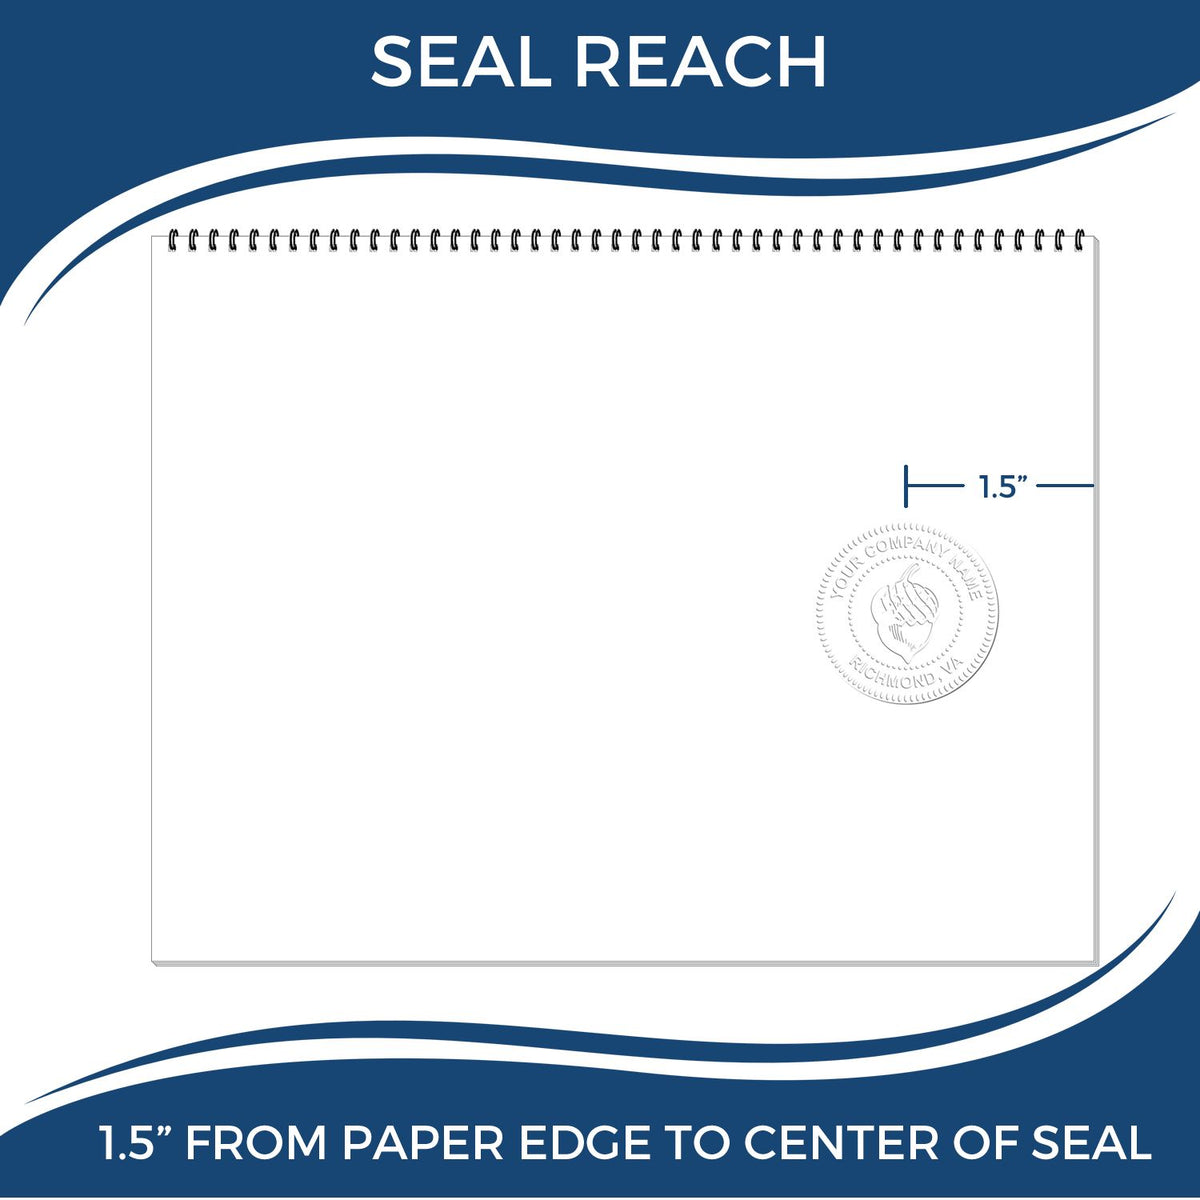 An infographic showing the seal reach which is represented by a ruler and a miniature seal image of the State of Colorado Architectural Seal Embosser